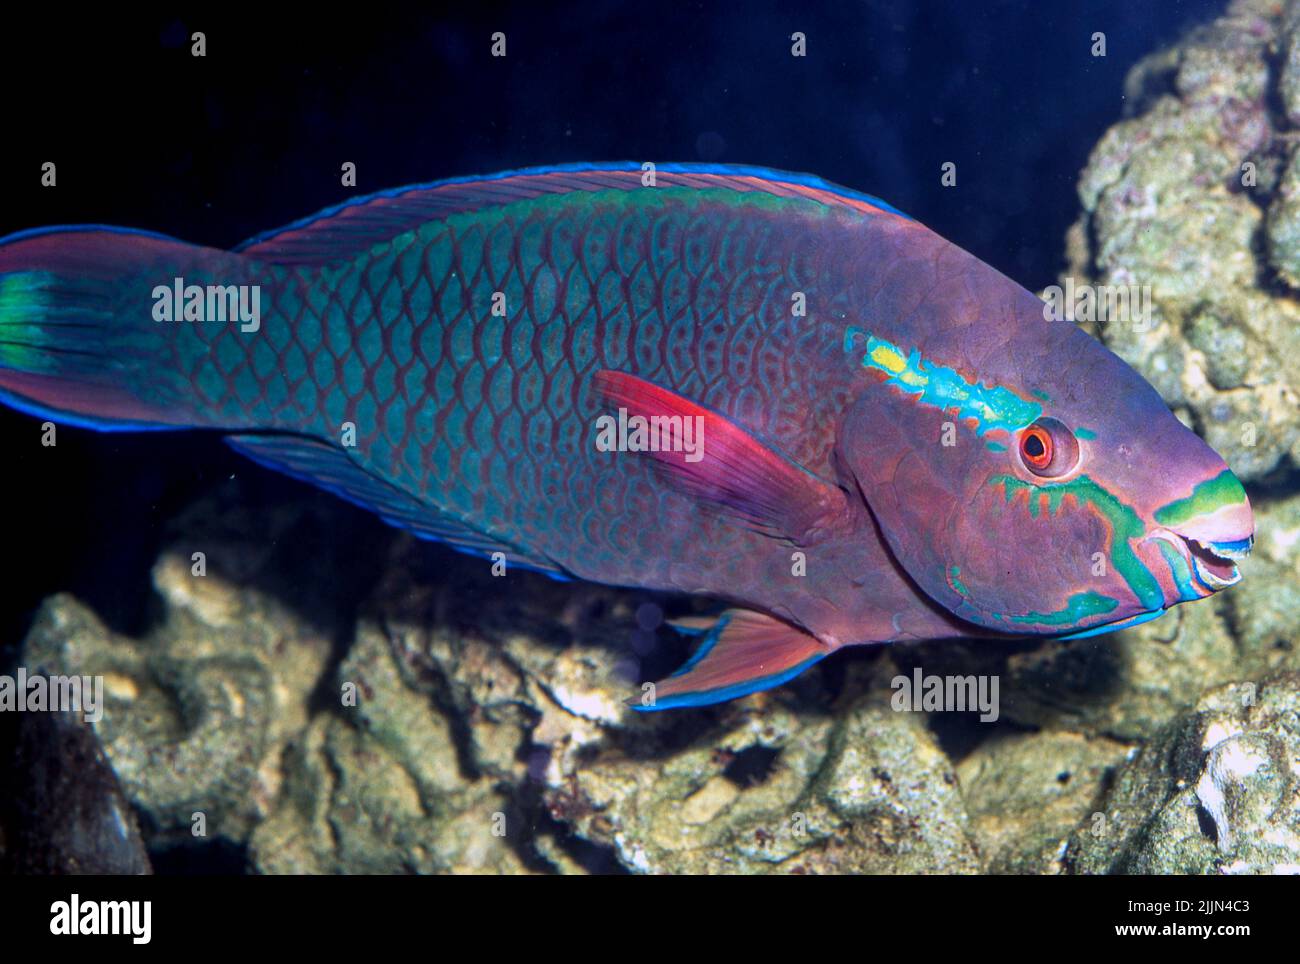 Silament-finned parrotfish (Scarus altipinnis). Stock Photo